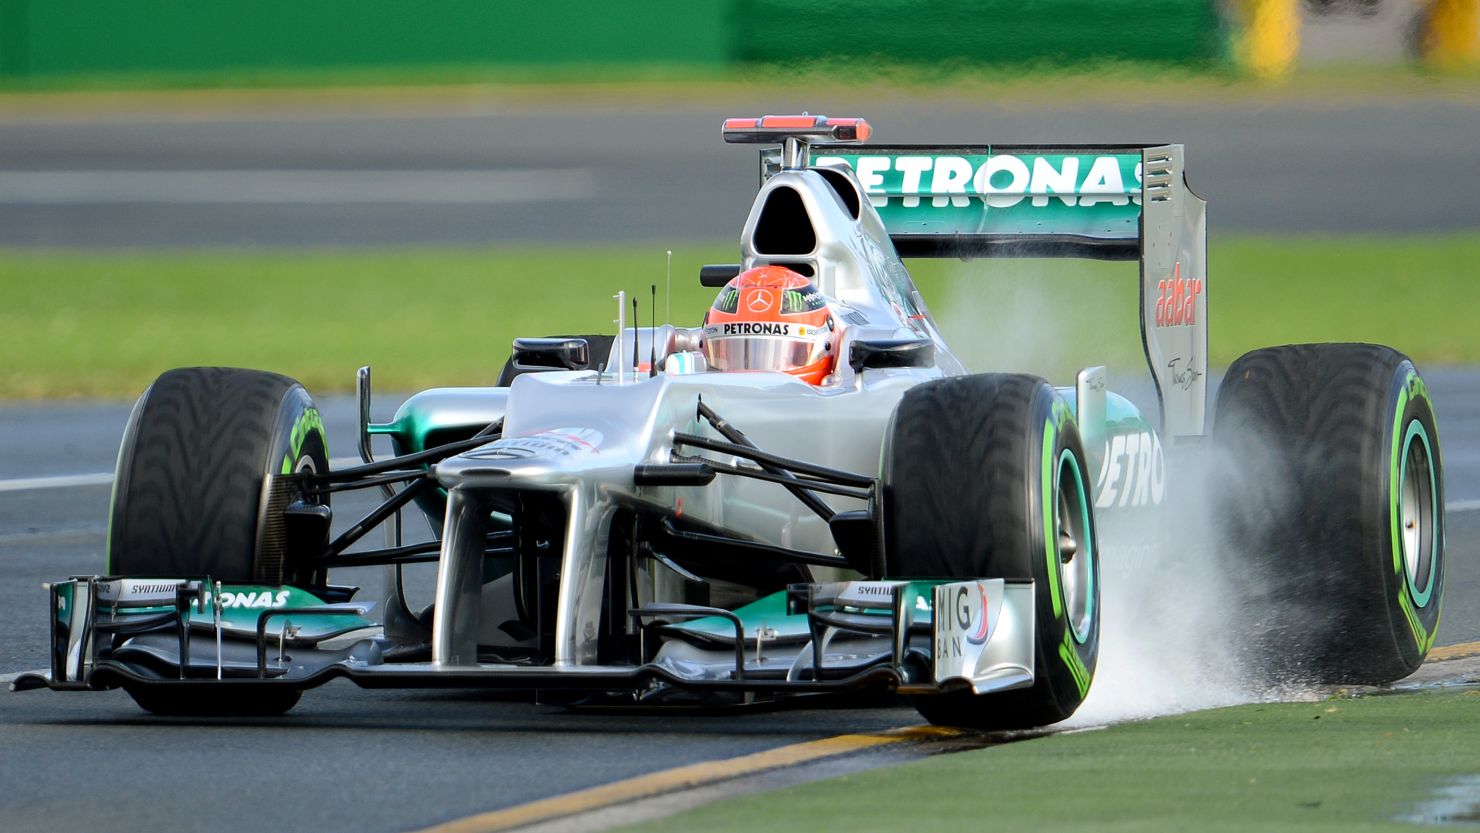 Seven-time world champion Michael Schumacher was fastest in wet practice conditions in Melbourne on Friday.